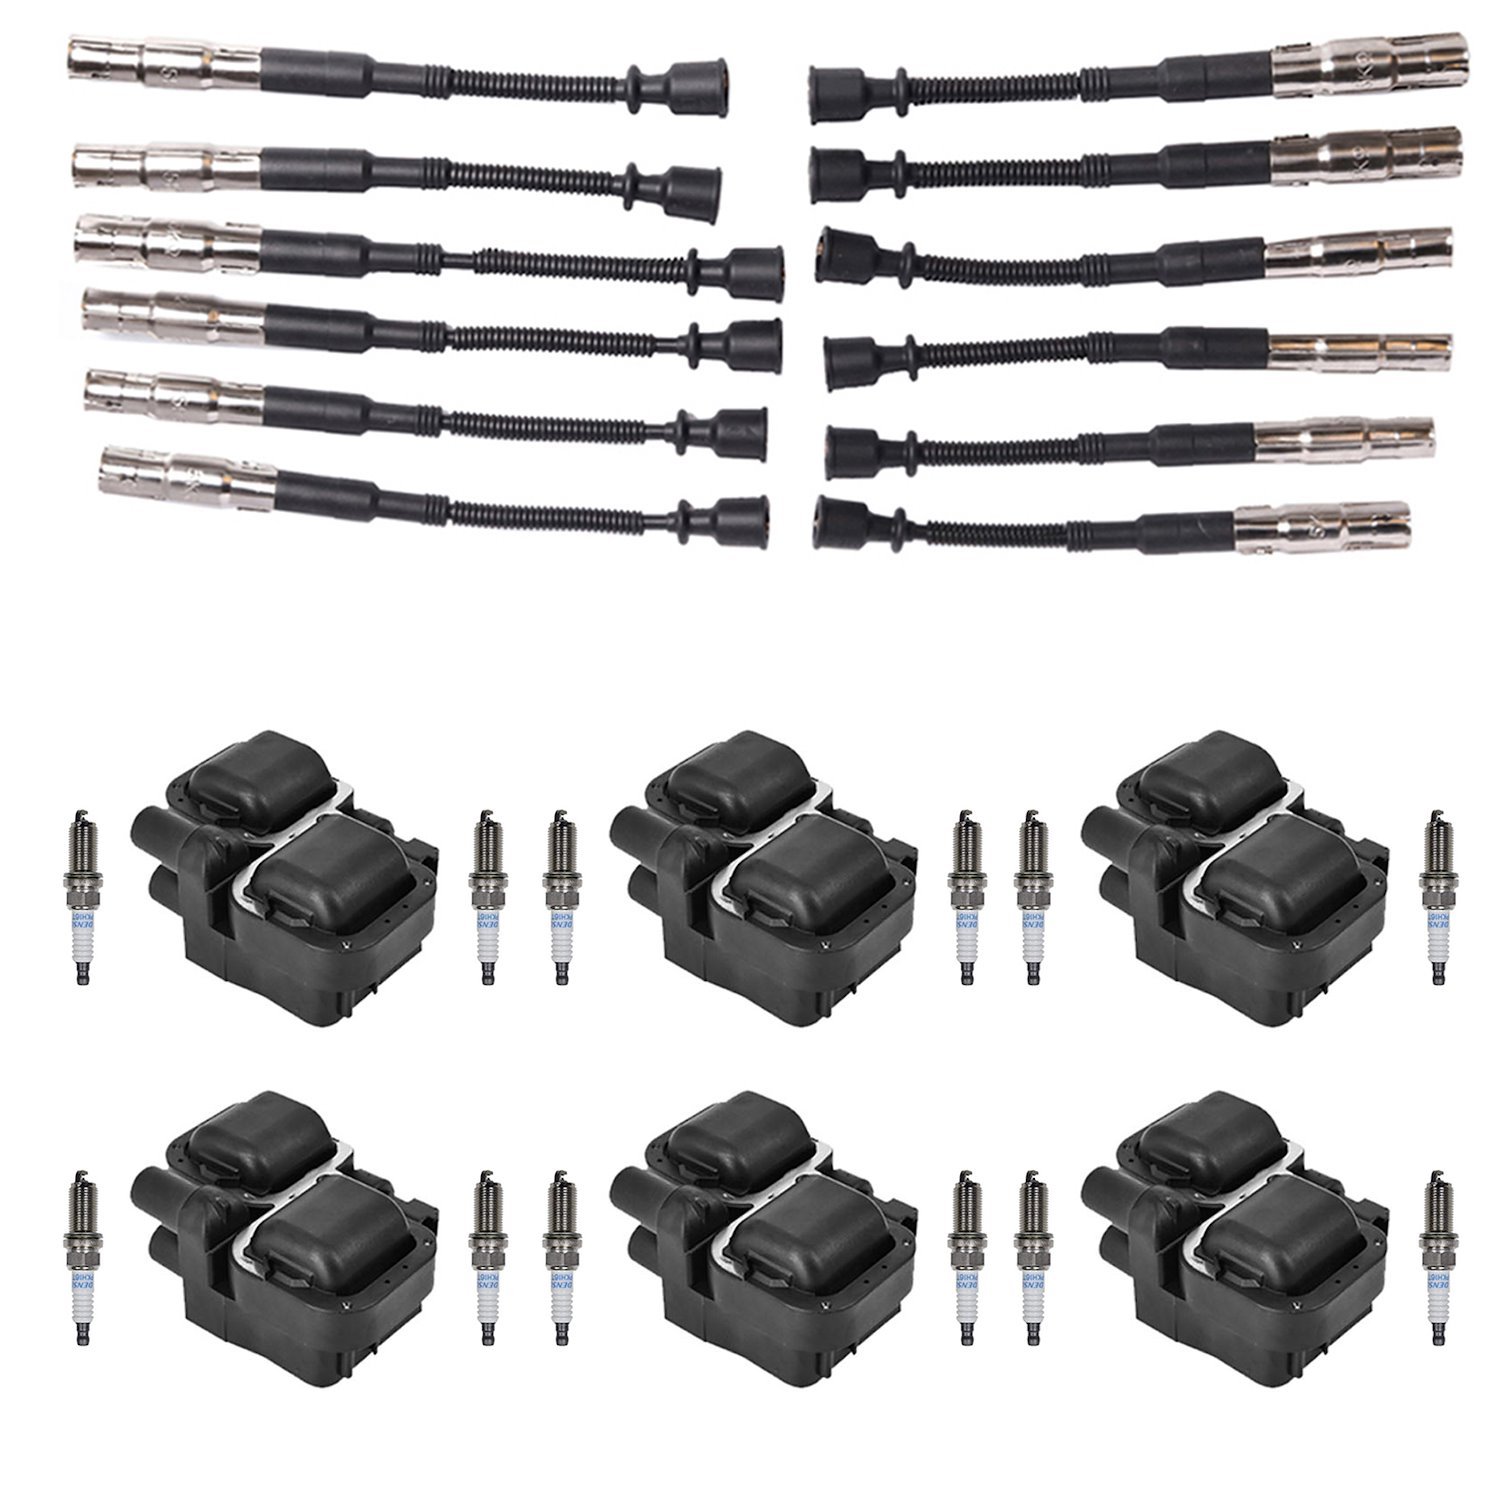 OE Replacement Ignition Coil, Spark Plug, and Spark Plug Wire Kit, Mercedes-Benz C/CL/CLK/ML Class